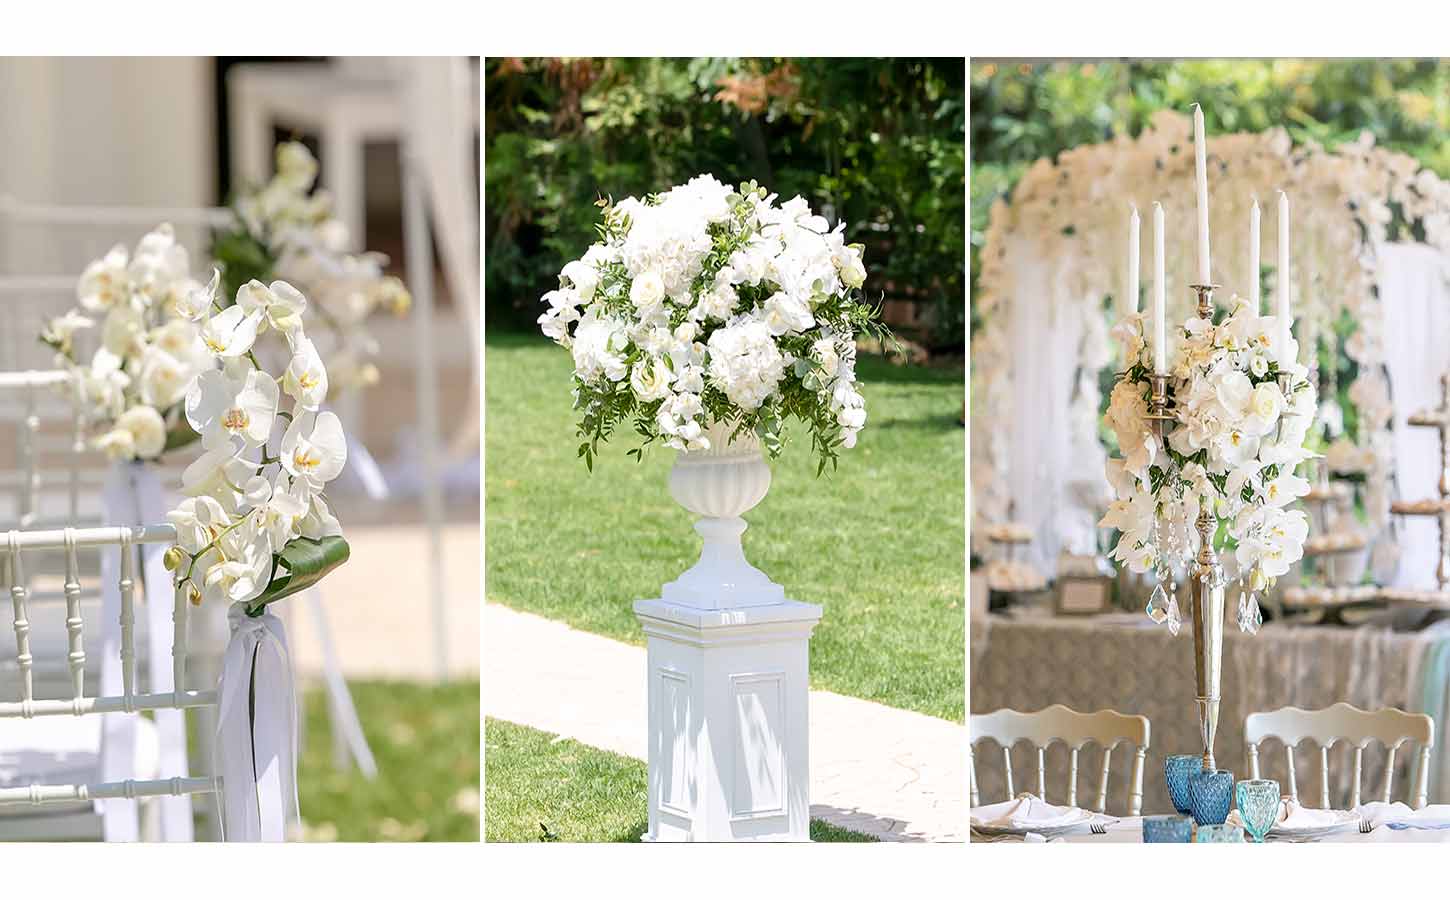 total white flowers wedding decoration